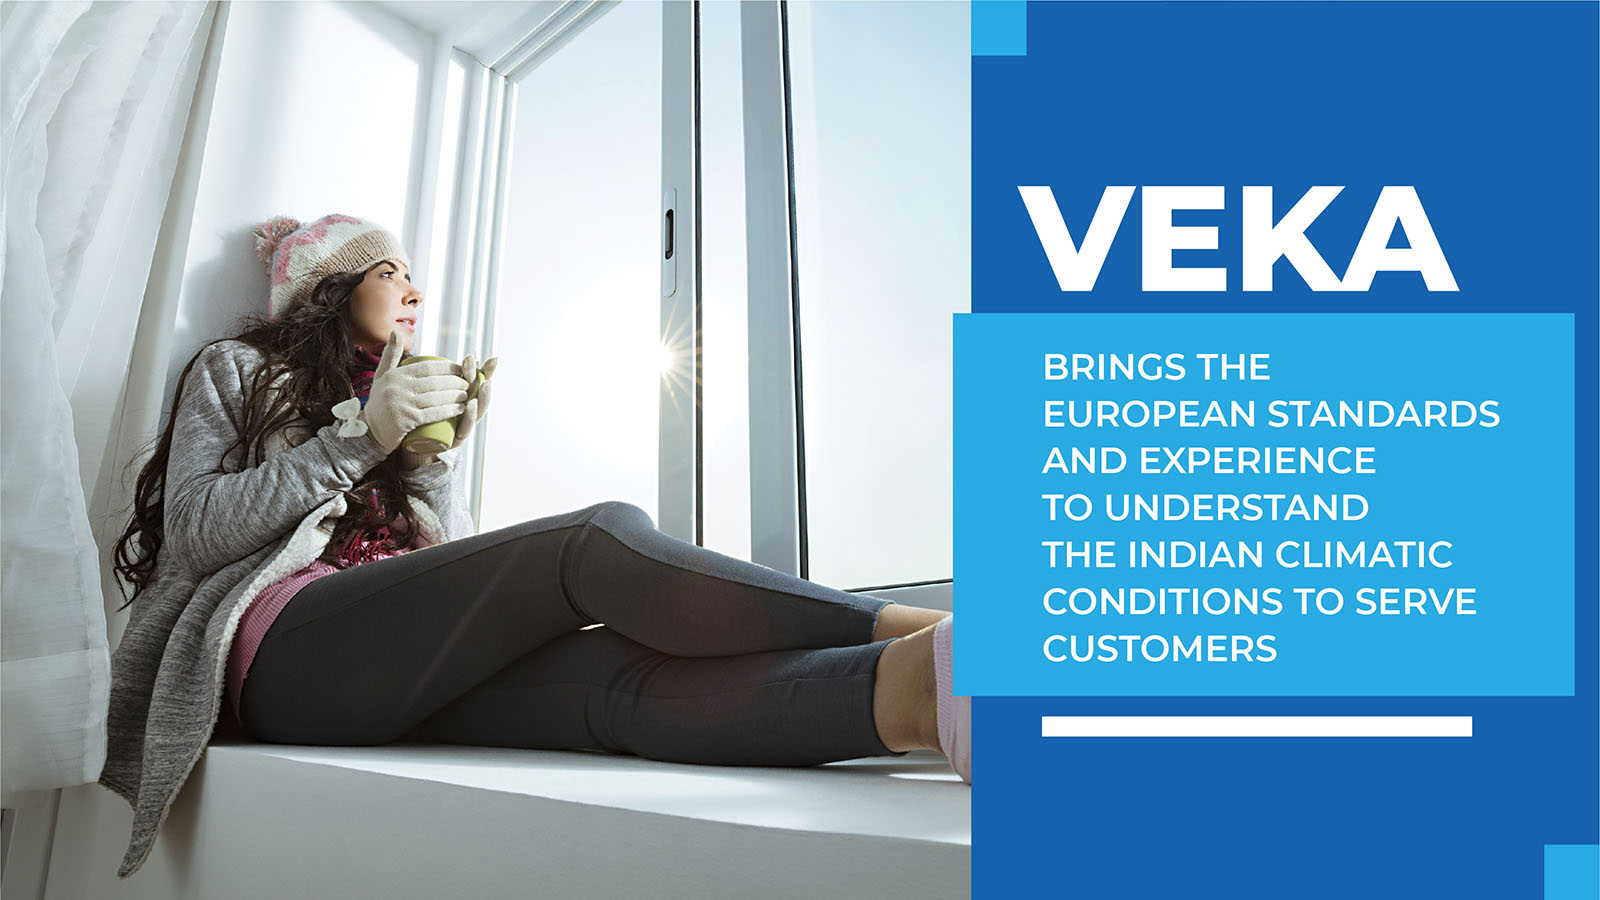 Veka brings the European standards and experience to understand the Indian climatic conditions to serve customers